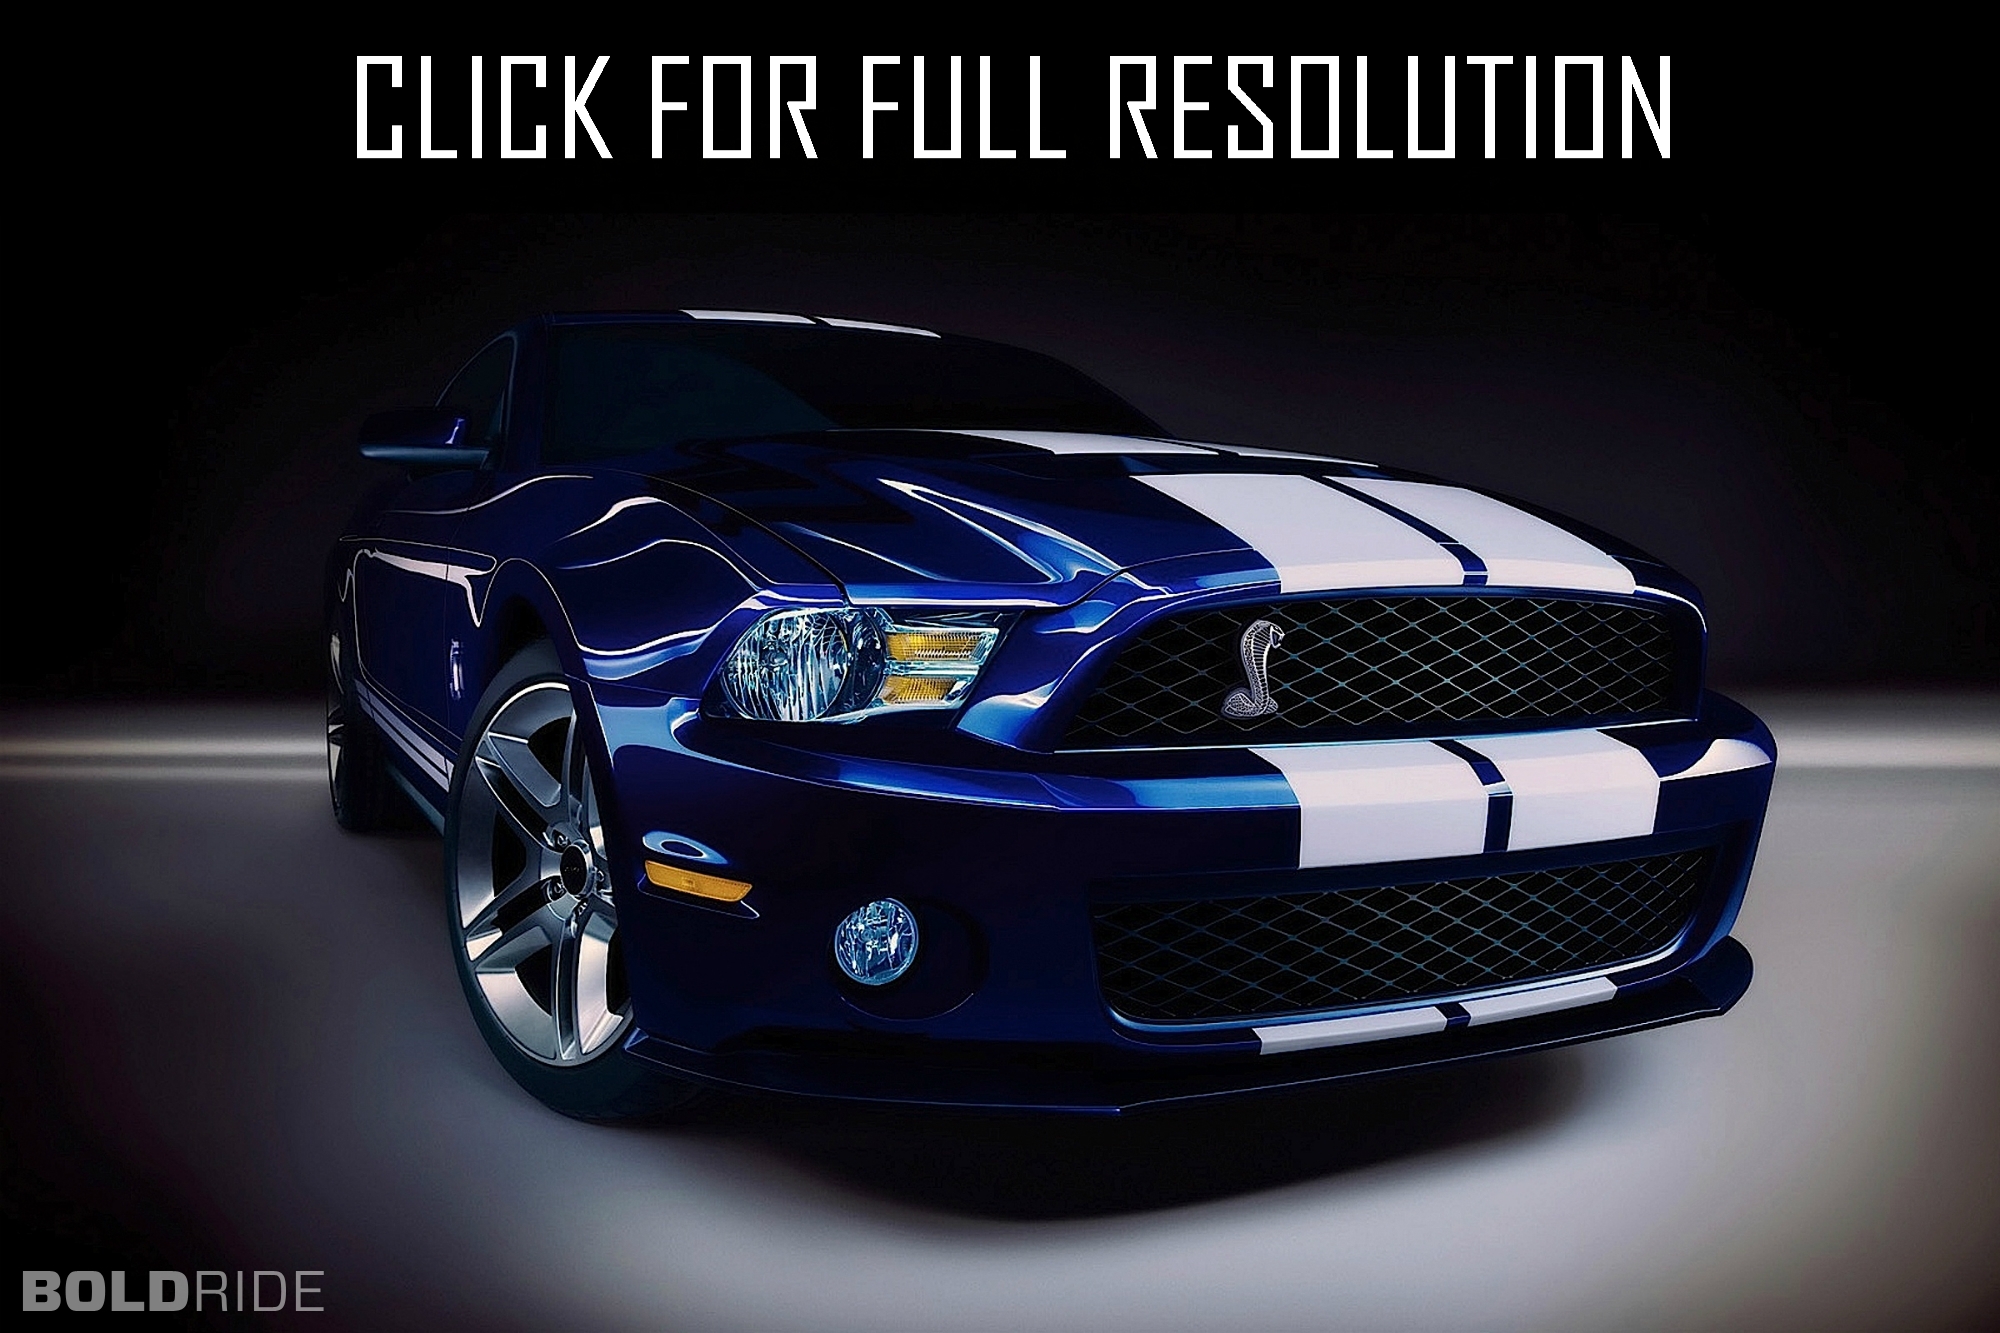 2012 Ford Mustang Shelby Gt500